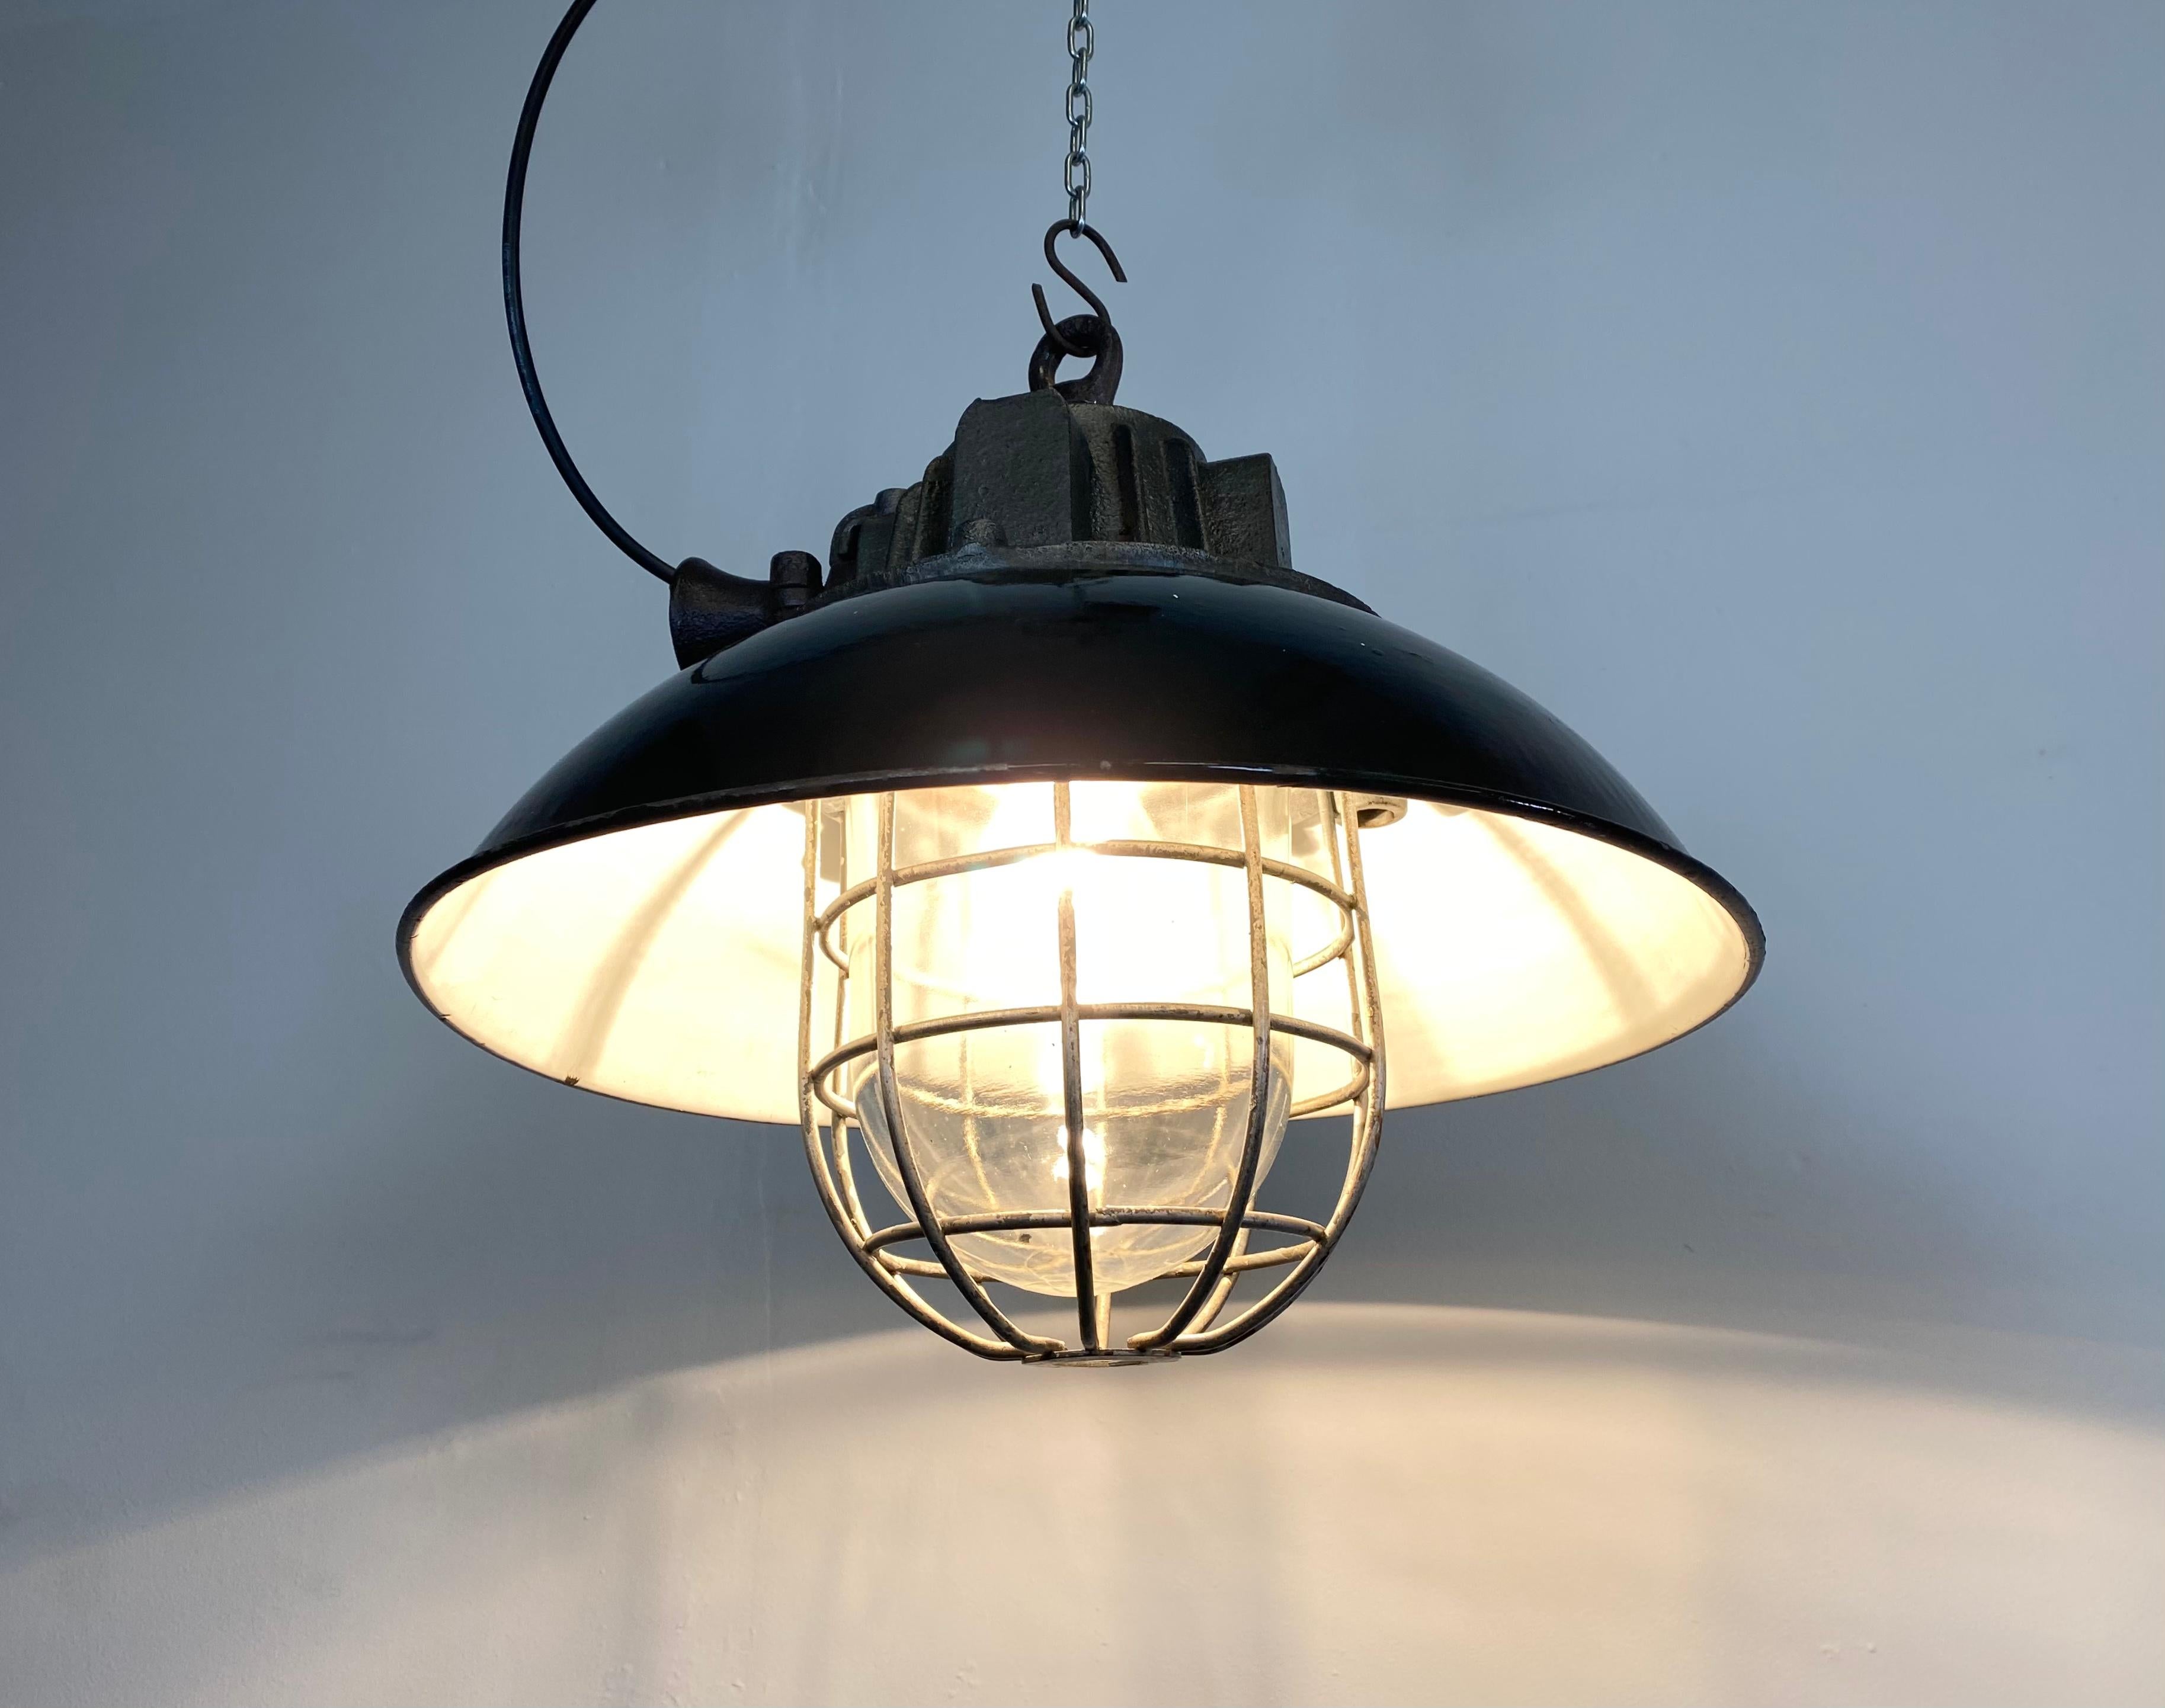 Black Enamel and Cast Iron Industrial Cage Pendant Light, 1950s For Sale 6